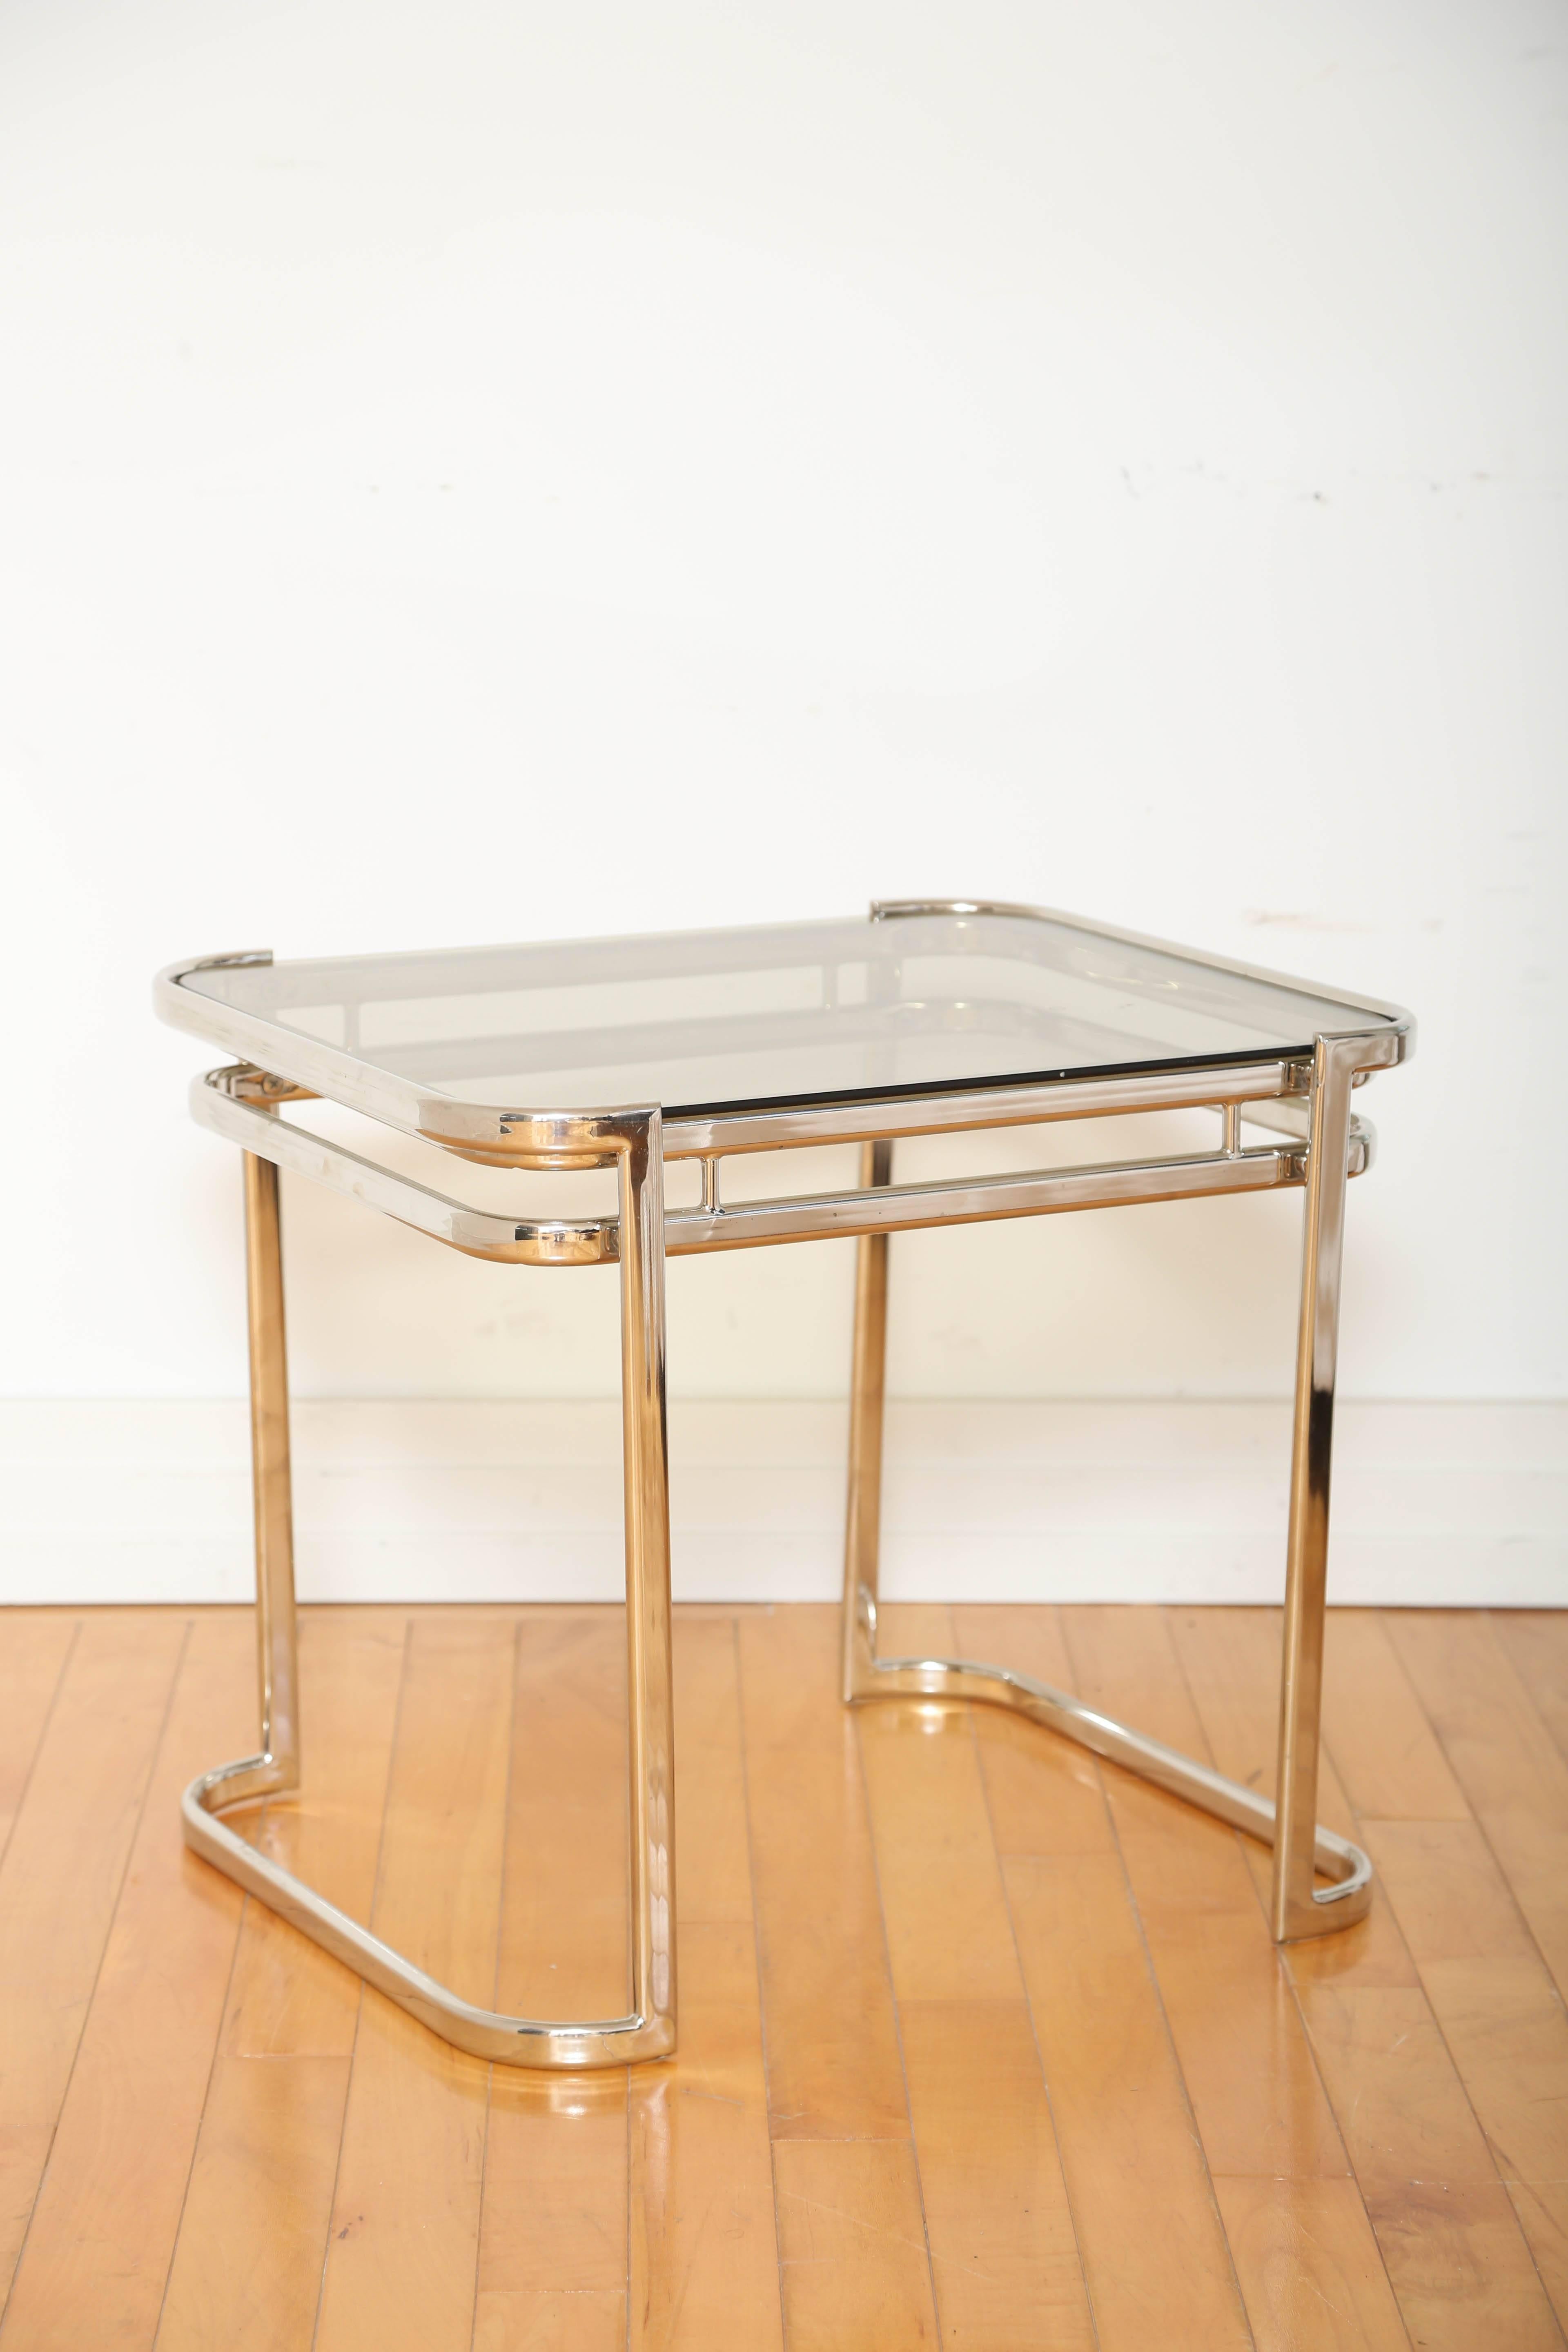 Polished Pair of Italian Mid-Century Modern Chrome Side Tables